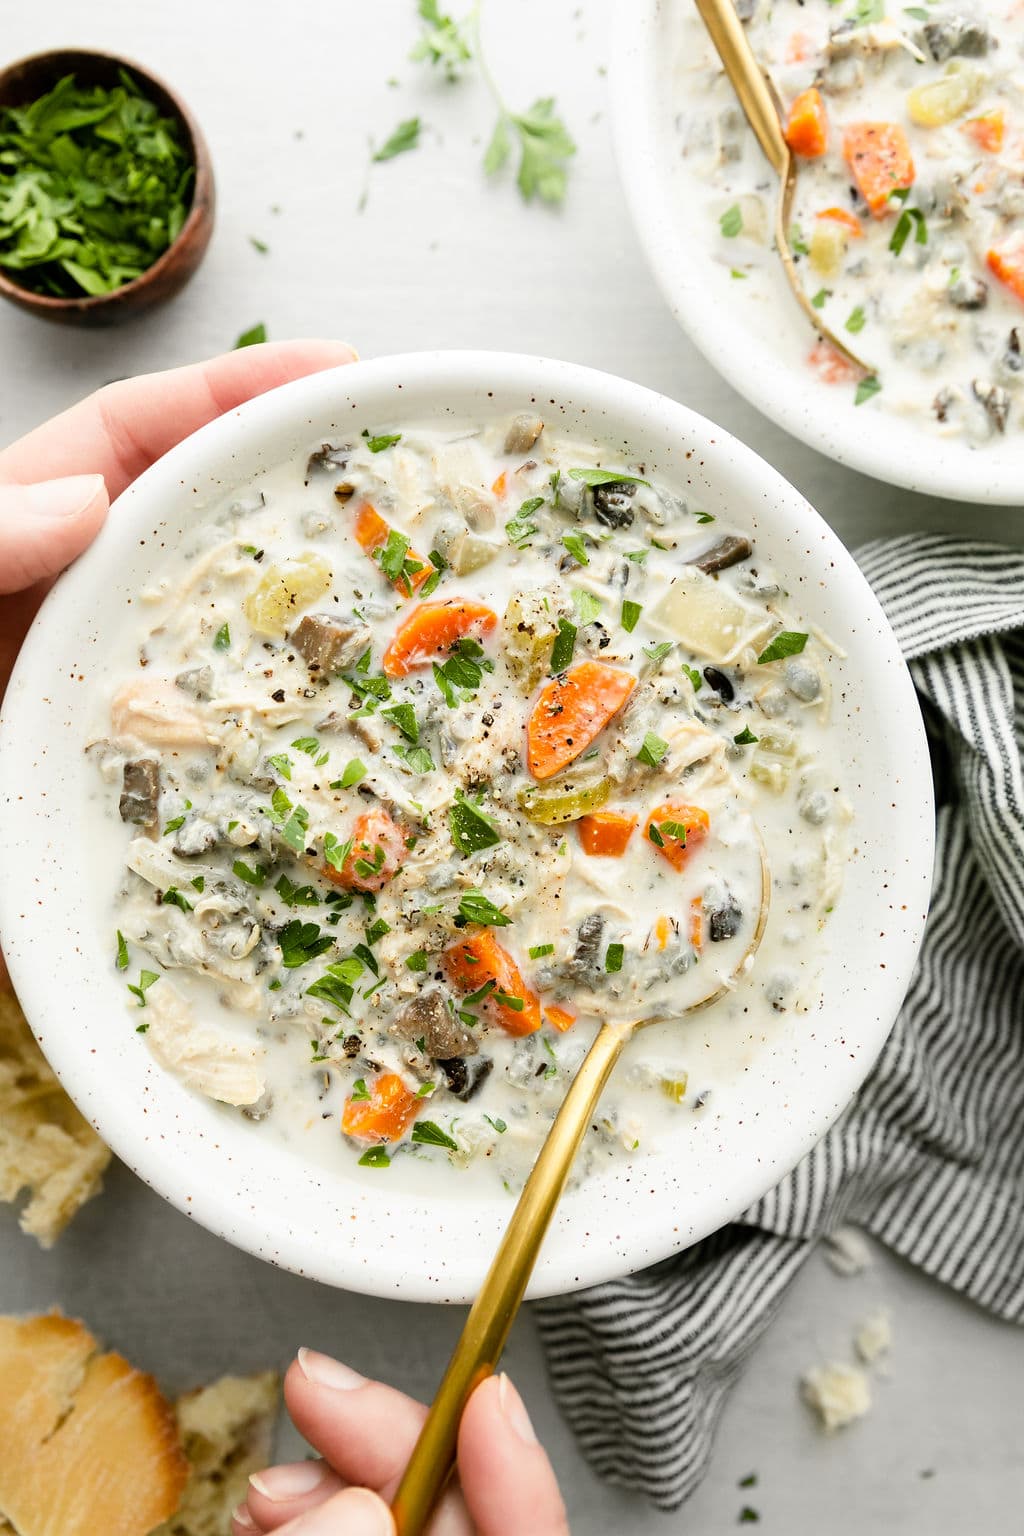 https://therealfooddietitians.com/wp-content/uploads/2019/02/Slow-Cooker-Chicken-Wild-Rice-Soup-7.jpg